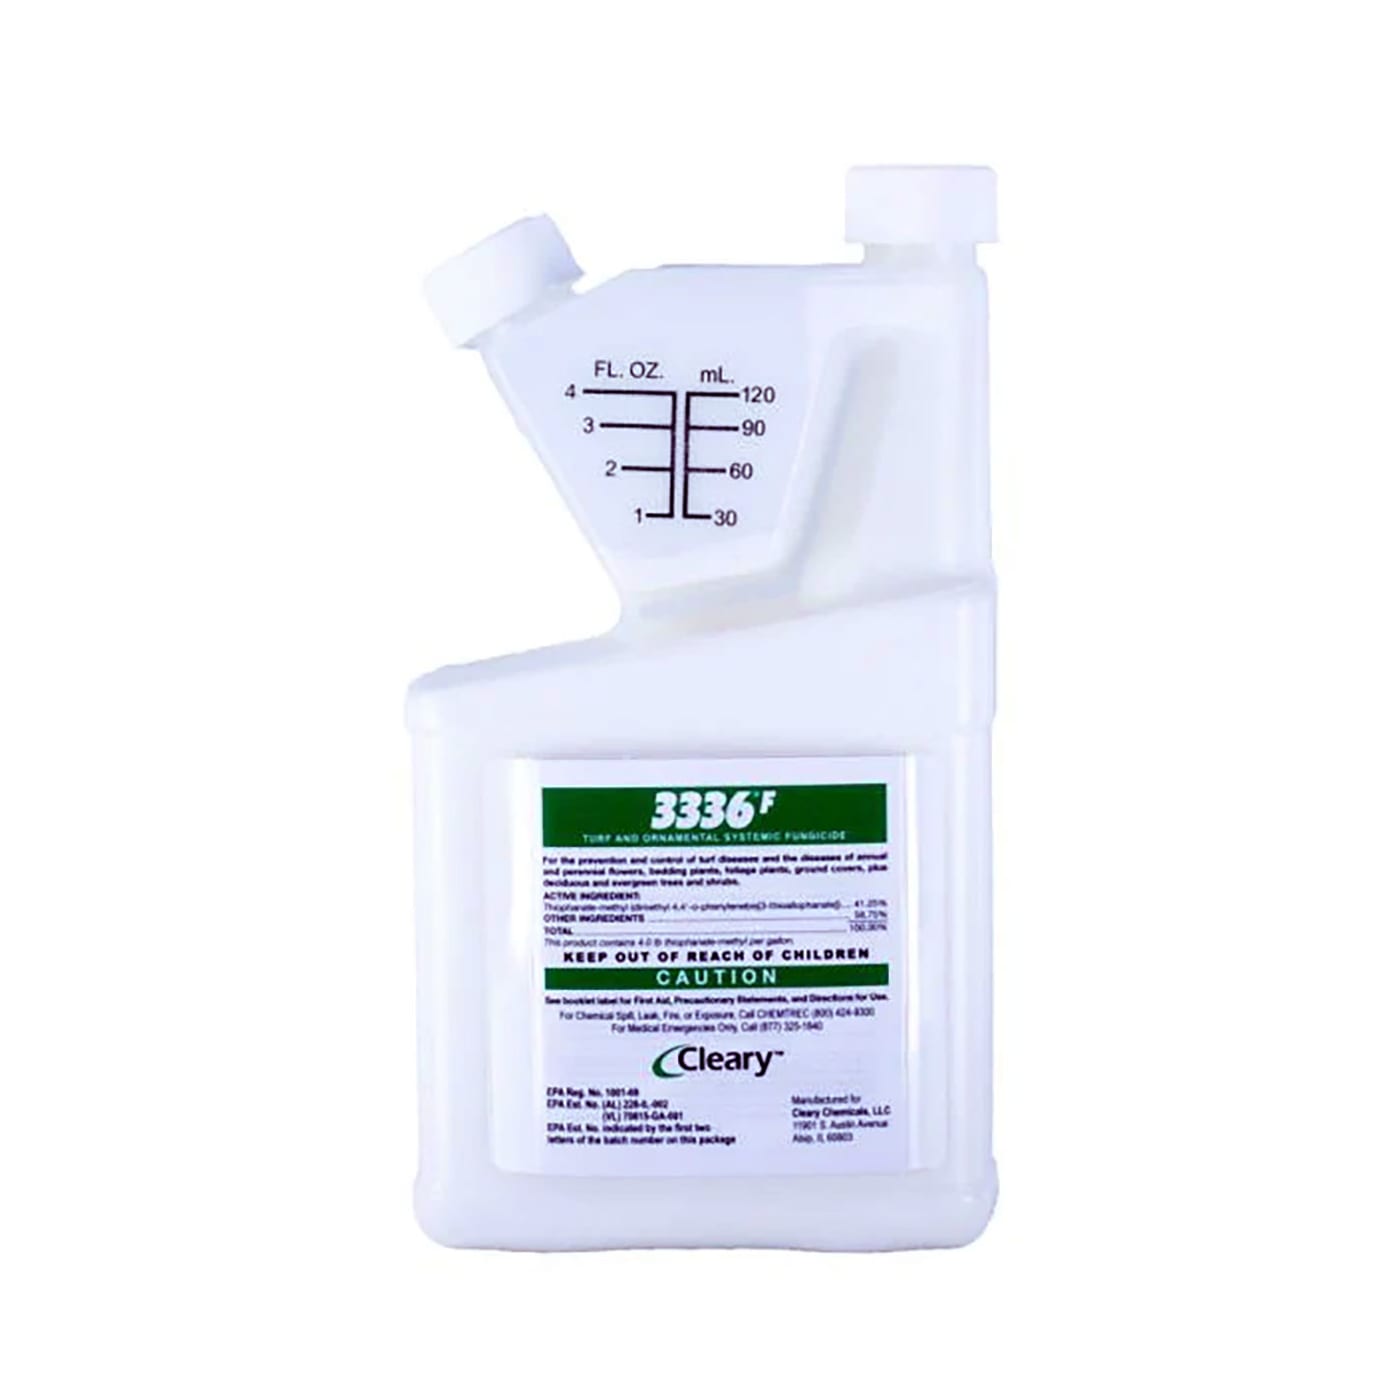 Cleary 3336 F Fungicide-qt